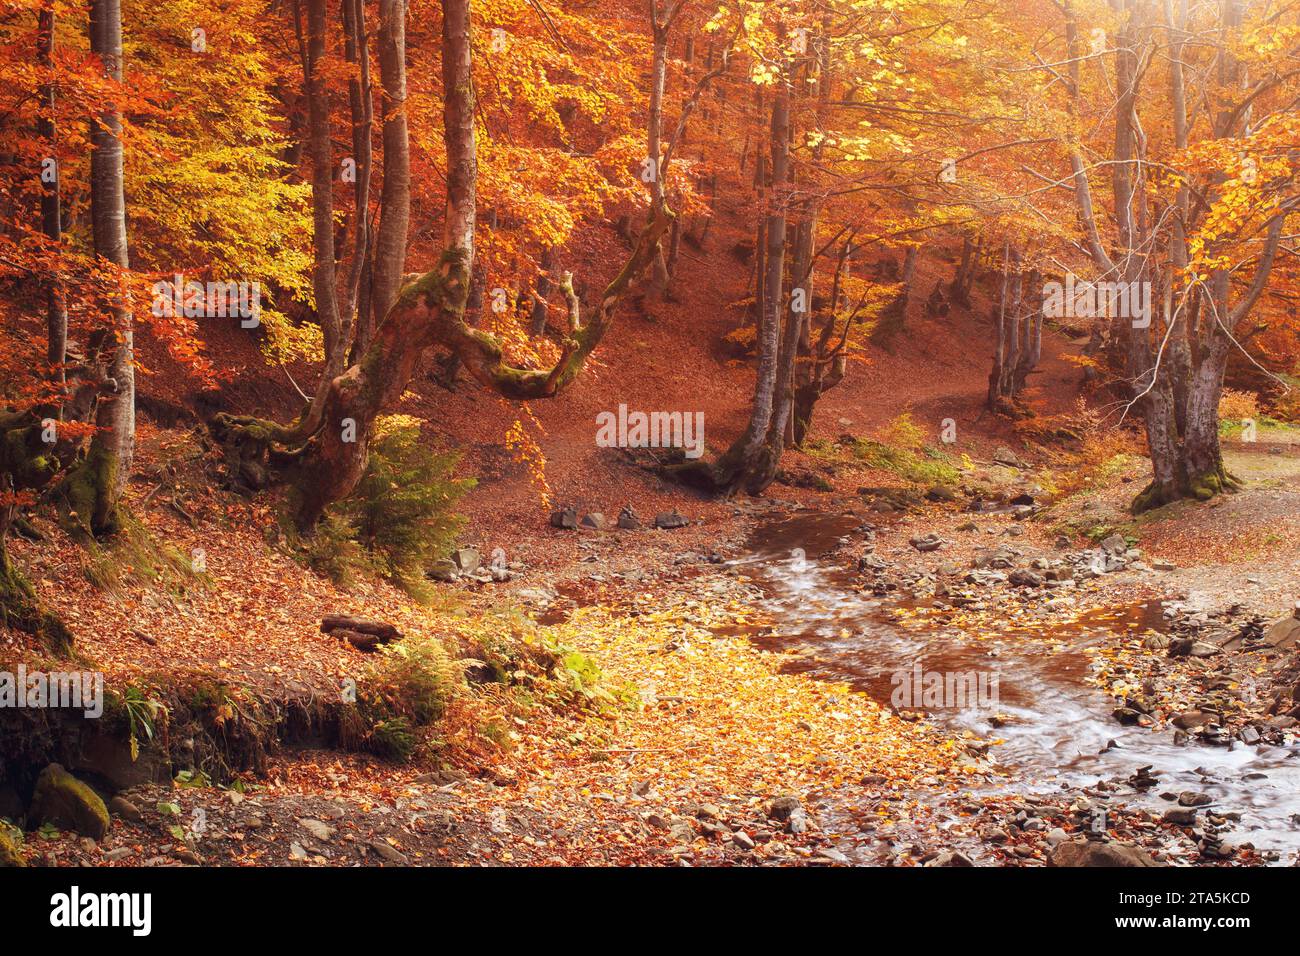 Golden Autumn Nature In National Park. Mountain Forest Landscape With Creek And Vibrant Yellow Foliage In Fall Season. Stock Photo